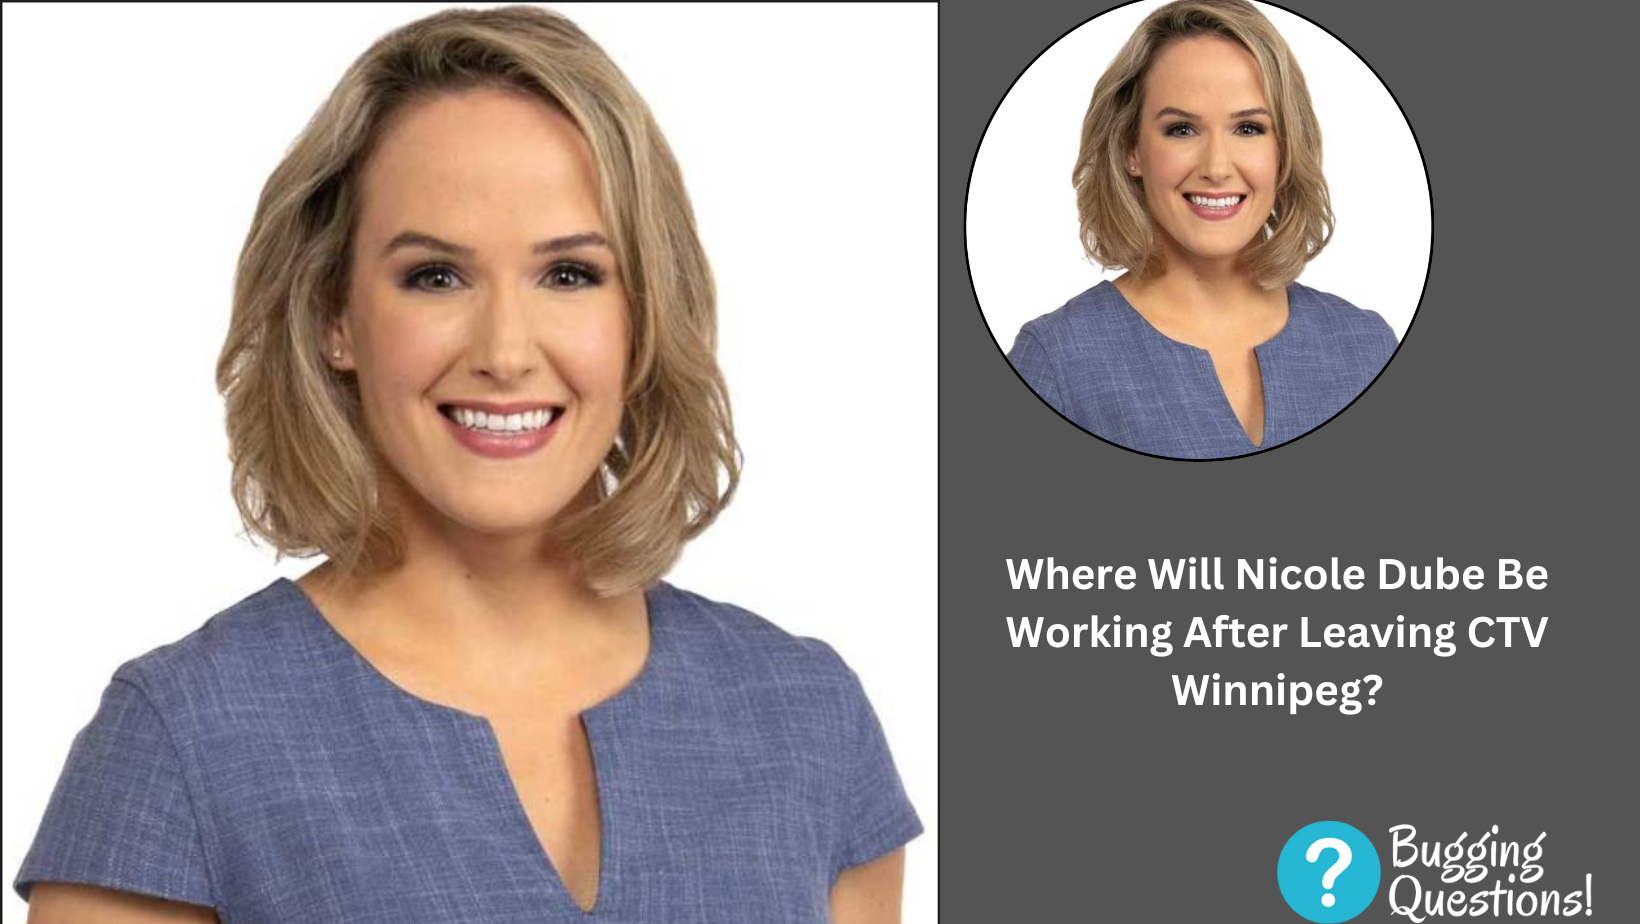 Where Will Nicole Dube Be Working After Leaving CTV Winnipeg?